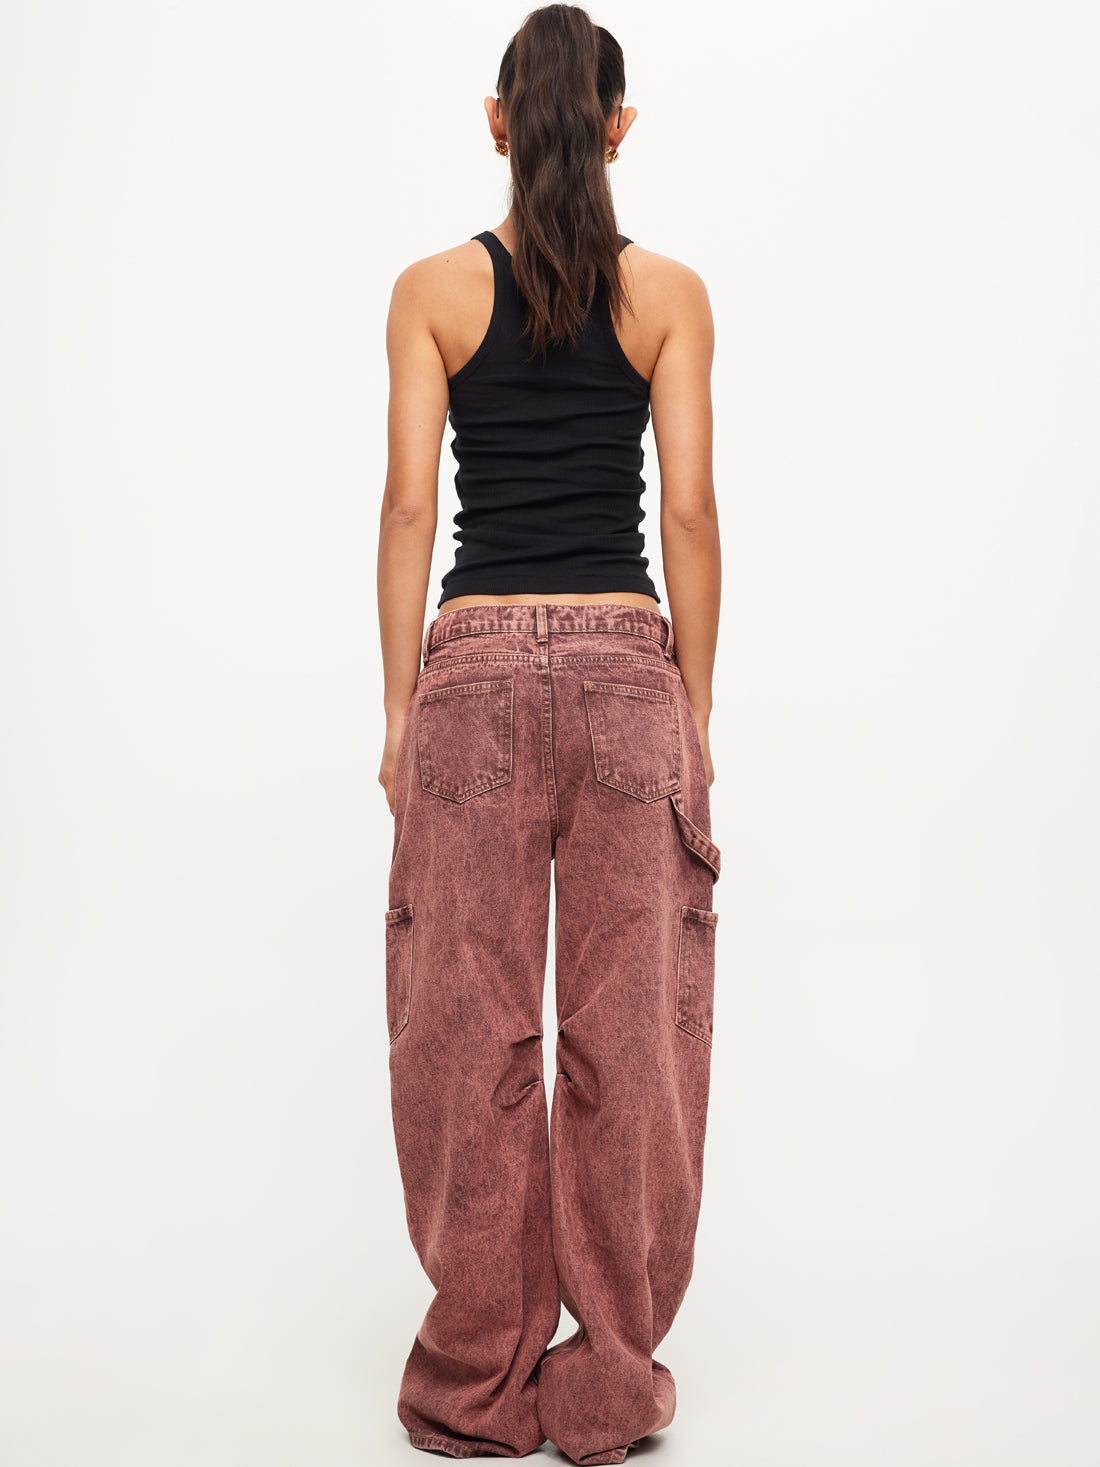 Miami Vice Low-Rise Baggy Jeans in Bronze Stonewash